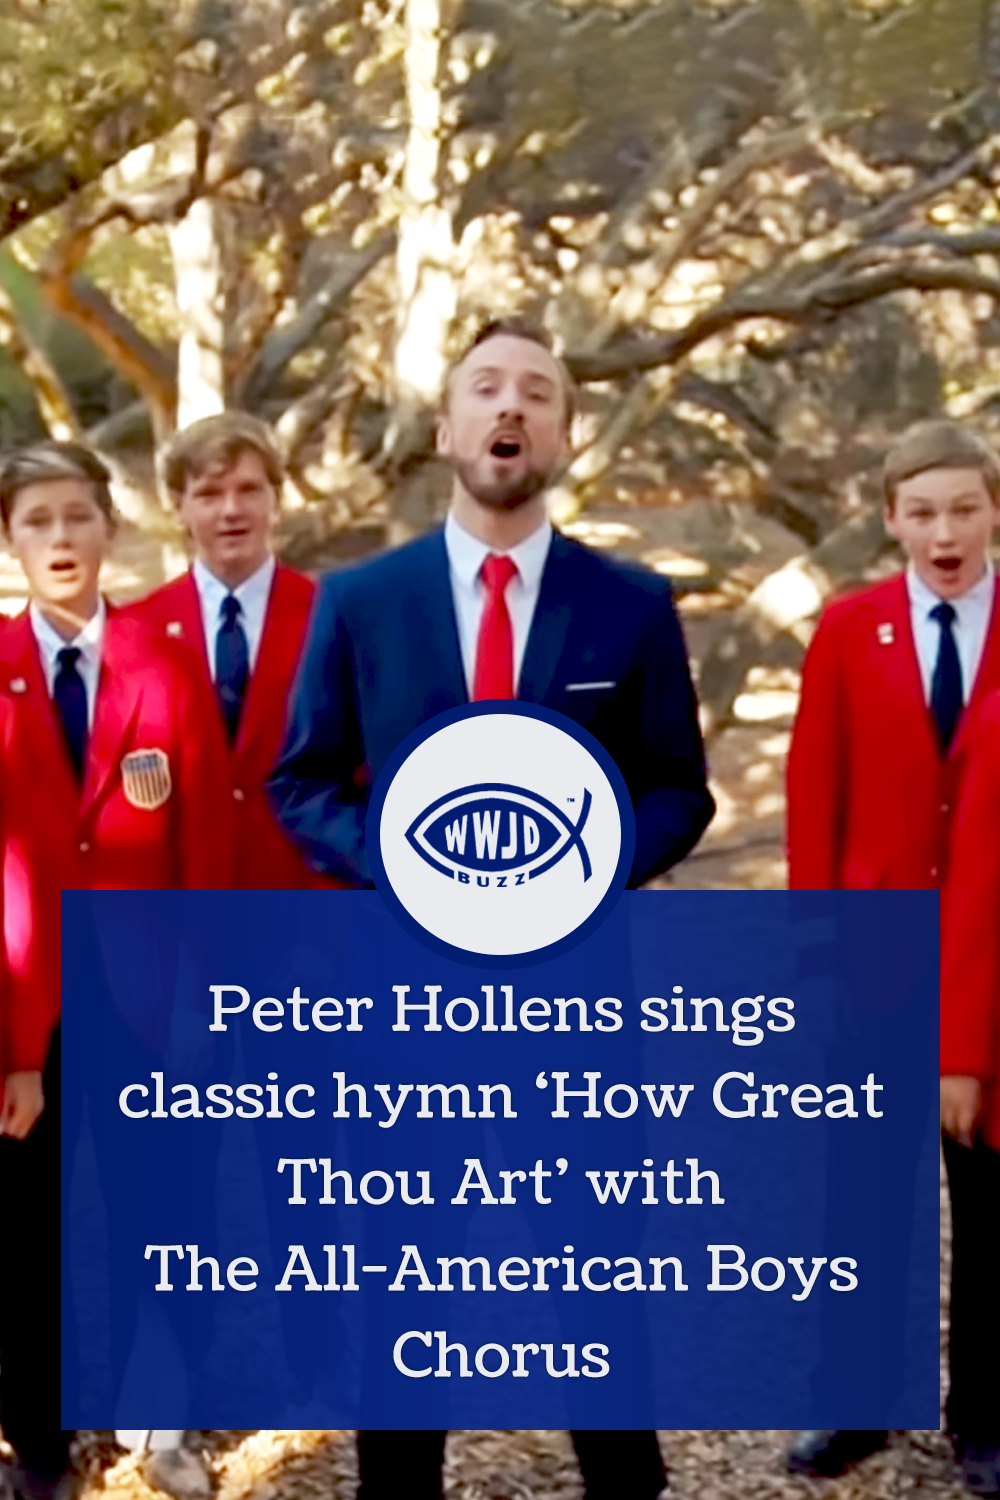 Peter Hollens sings classic hymn ‘How Great Thou Art’ with The All-American Boys Chorus